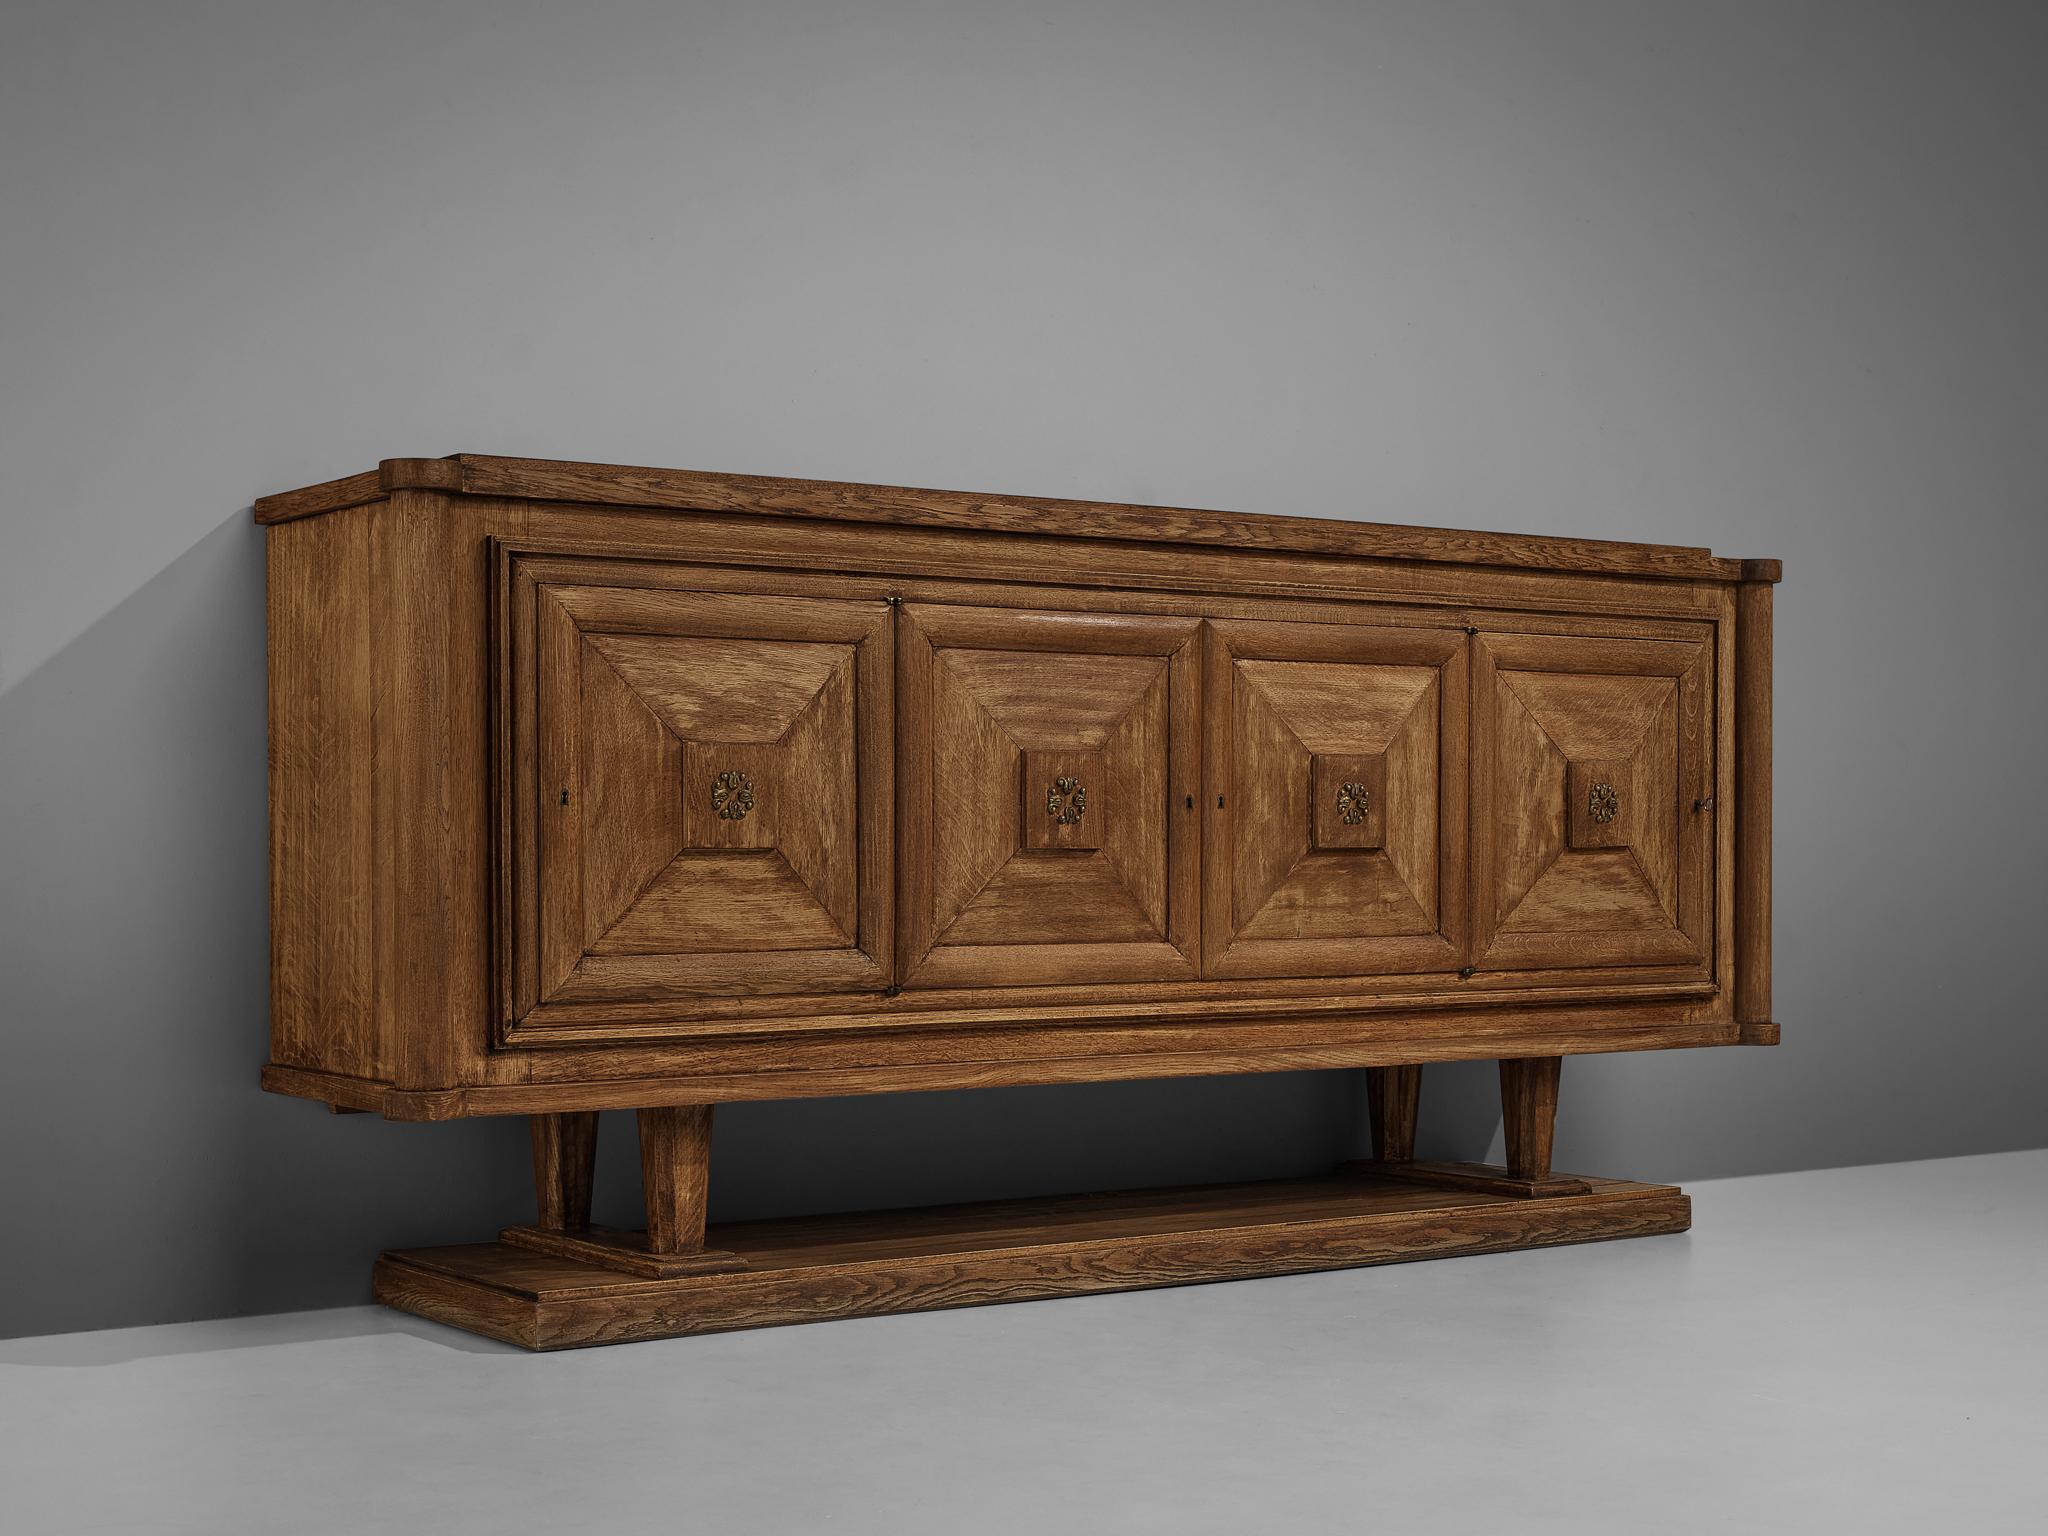 Sideboard, oak, brass, France, 1950s

Grand art deco sideboard with four graphical doors. This expressive credenza features striking woodwork. The doors are structured with geometric forms, the center is highlighted with ornaments in brass. An